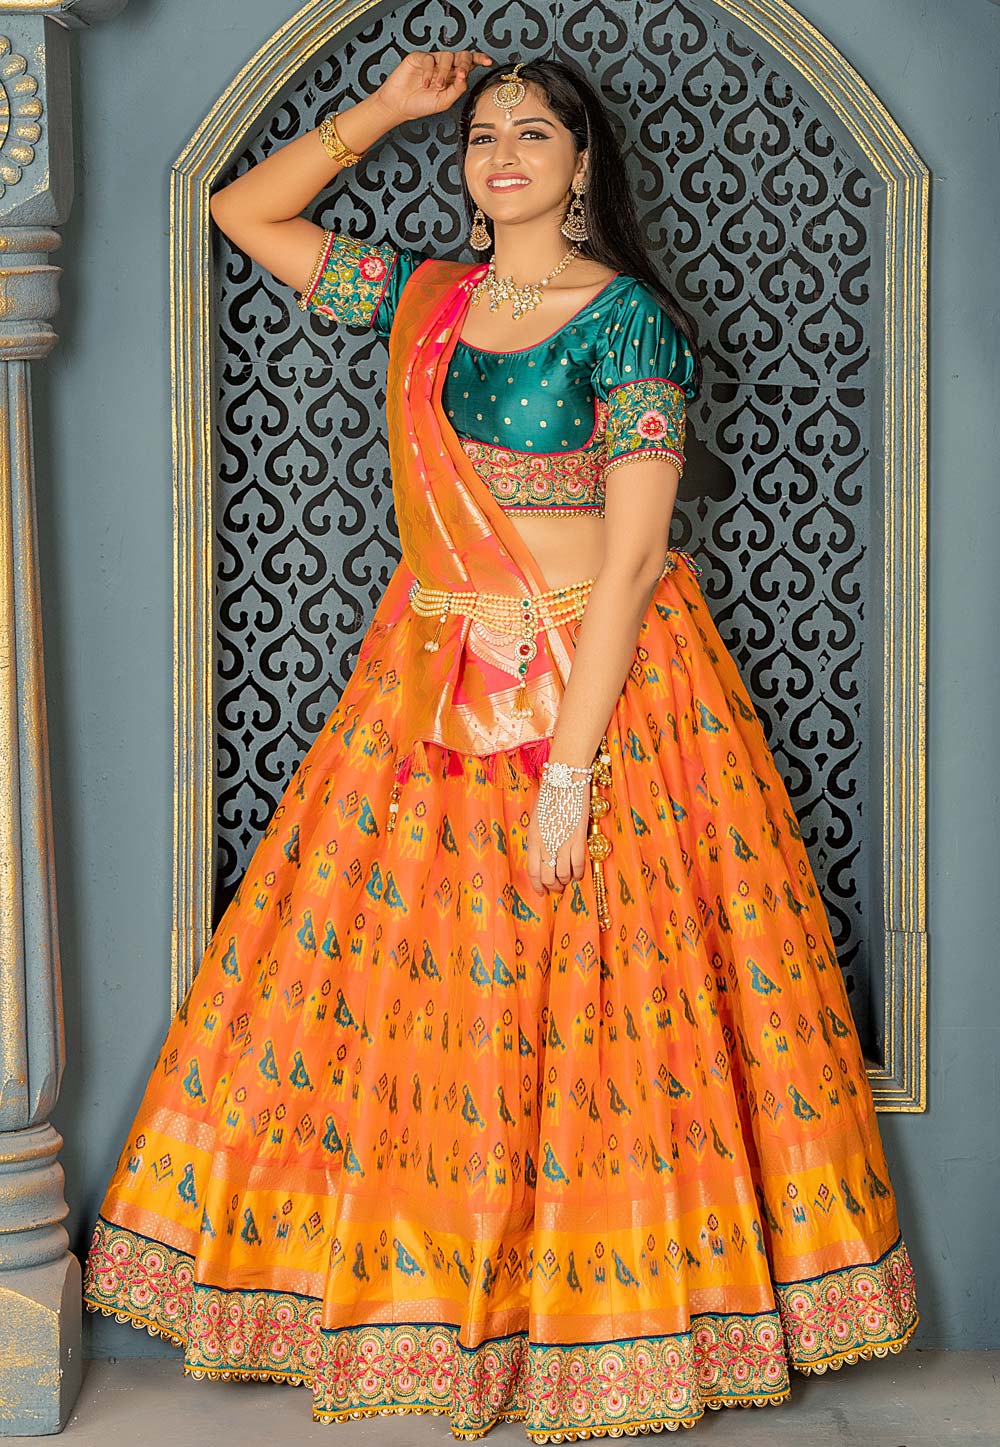 Buy latest Women's Lehengas from Anouk ₹750 - ₹3750 On Myntra online in  India - Top Collection at LooksGud.in | Looksgud.in